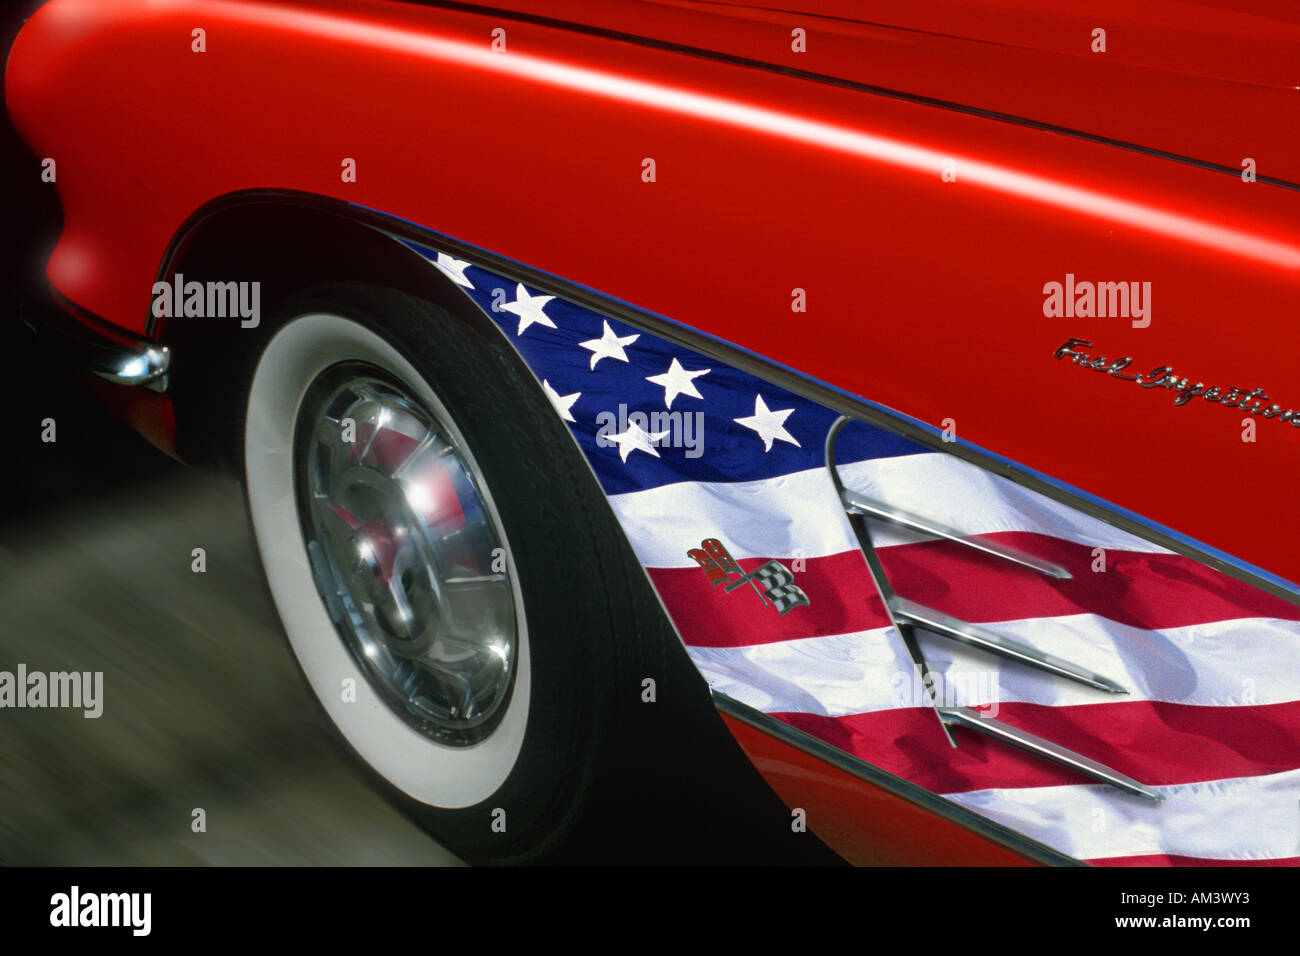 Red sports car with American flag trim Stock Photo